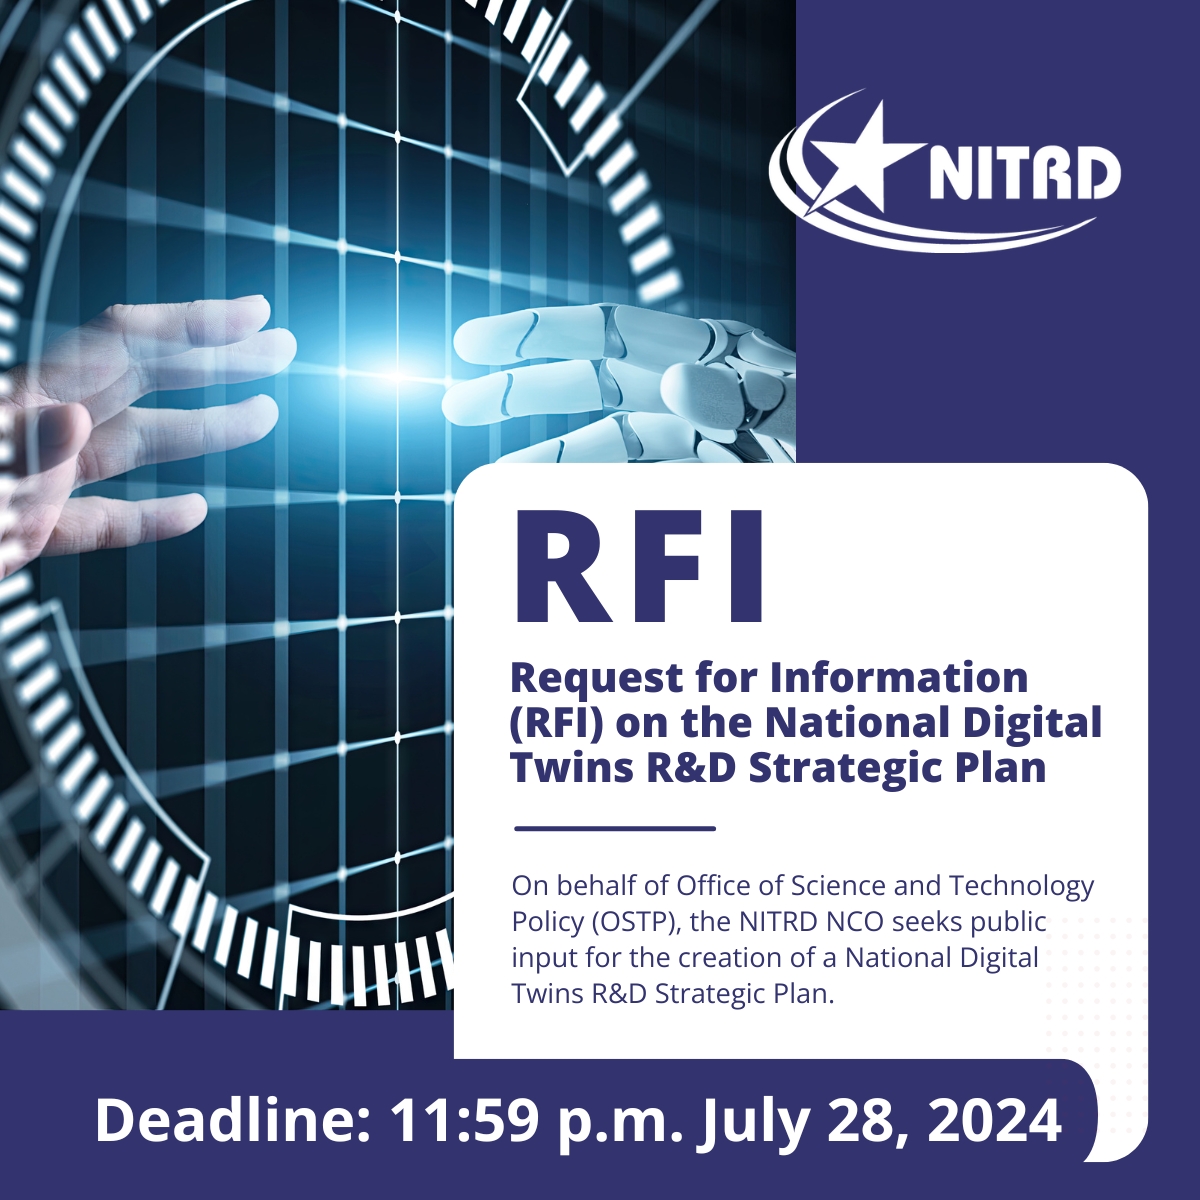 On behalf of the Office of Science & Technology Policy, NITRD NCO seeks public input for the creation of a National Digital Twins R&D Strategic Plan.